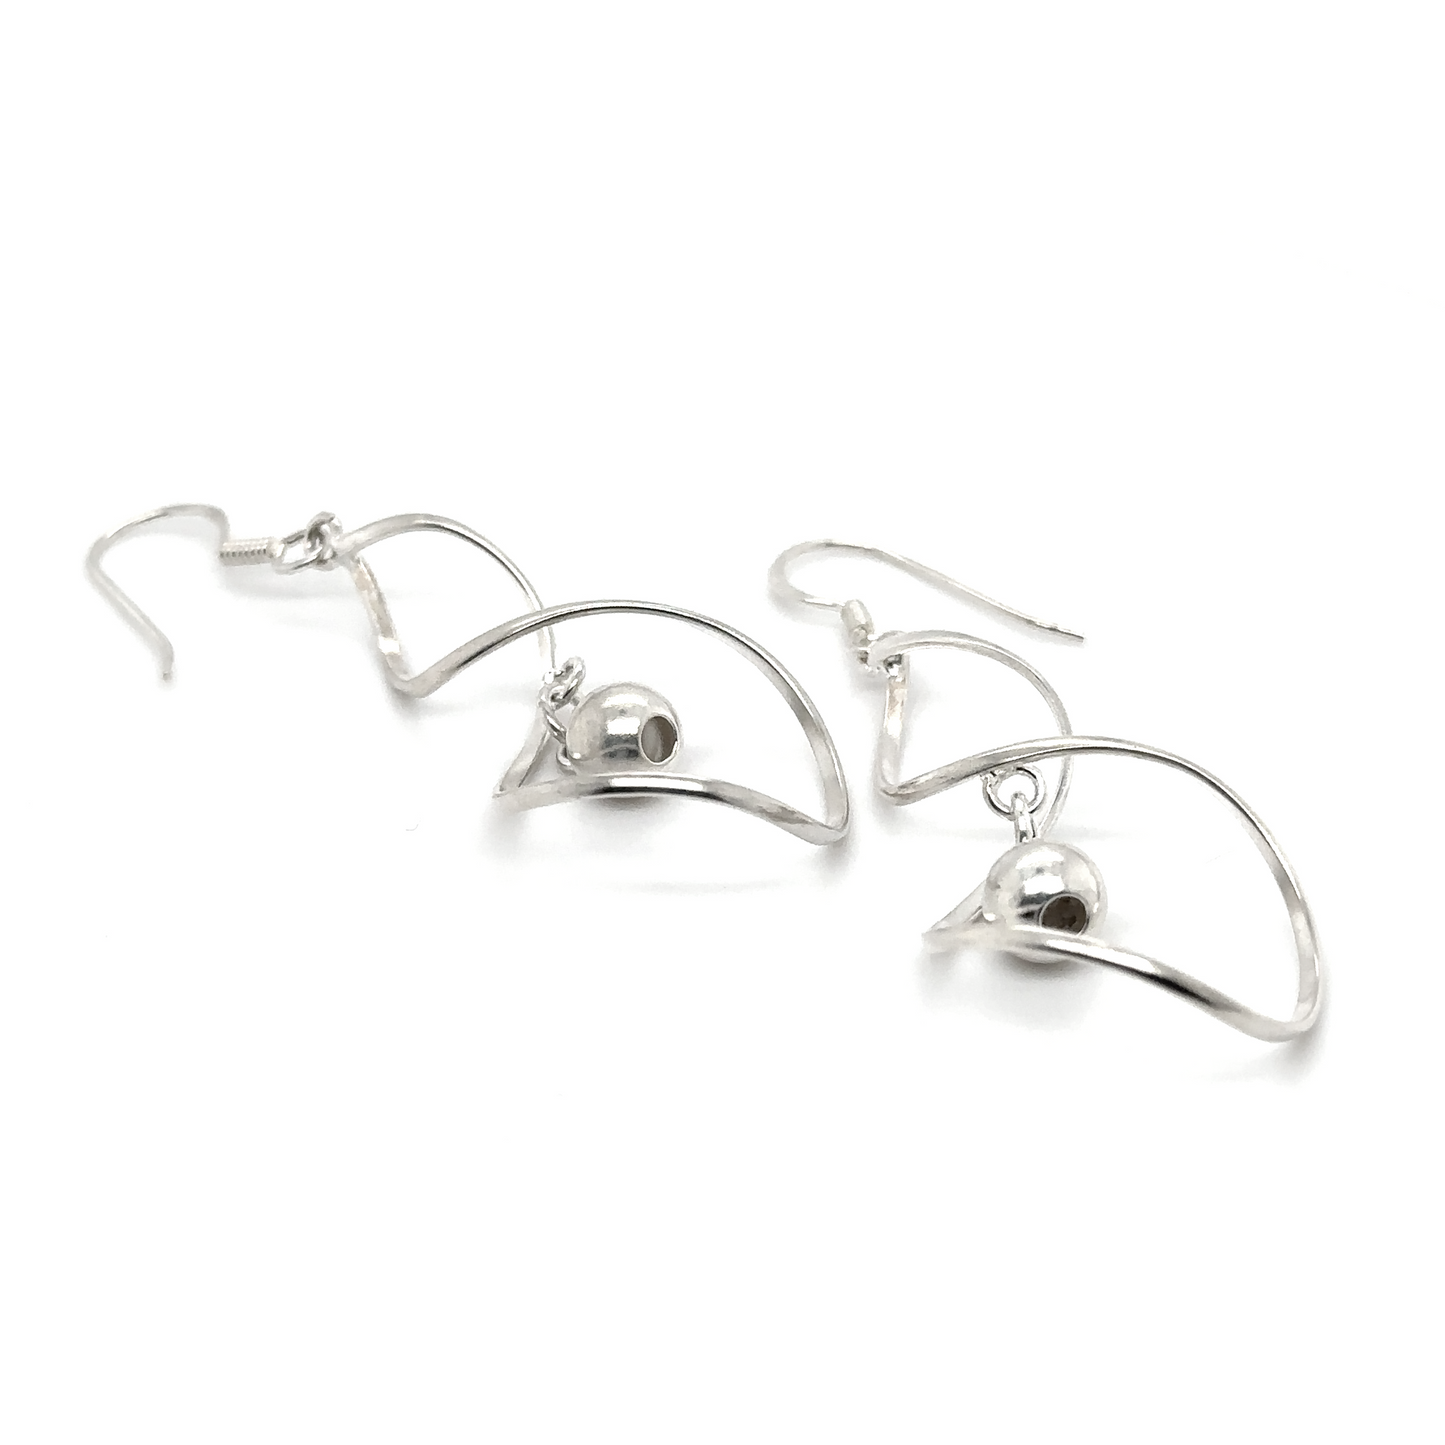 A pair of Super Silver Freeform Wavy Silver Earrings with Balls, with a contemporary design and modern charm, featuring a ball in the middle.